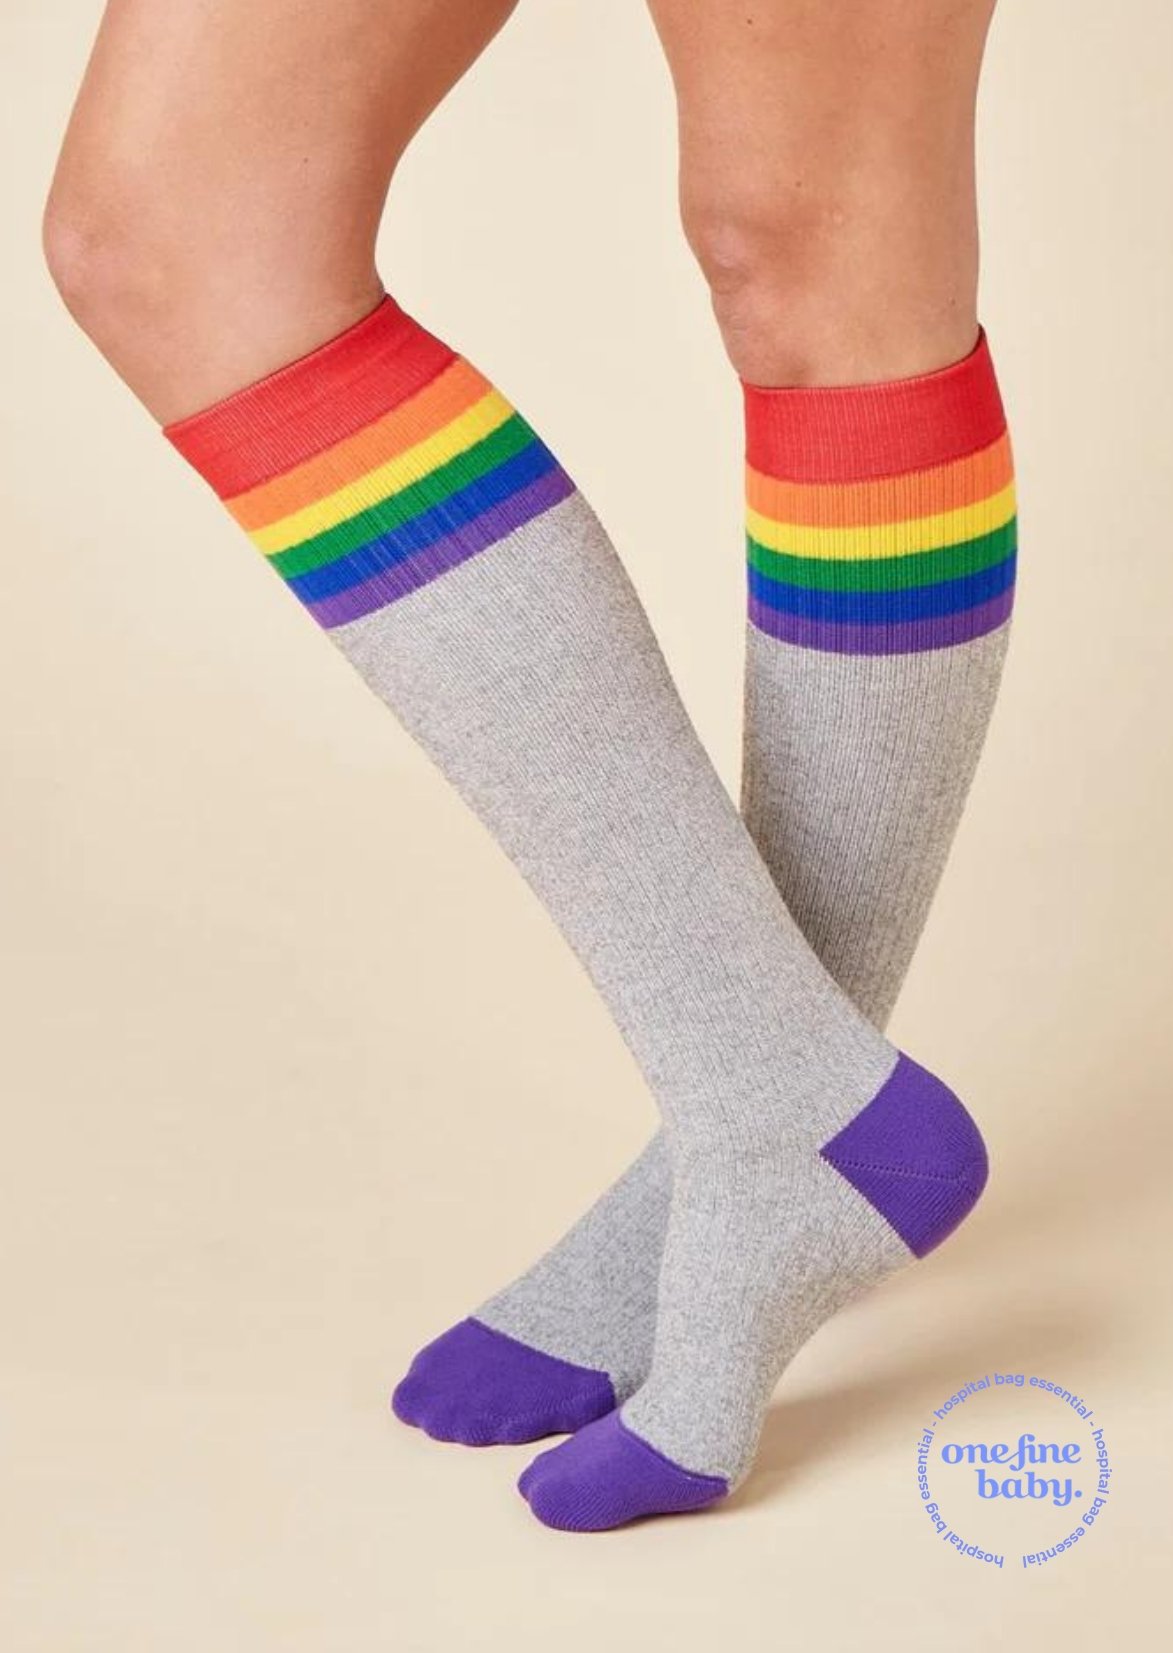 TheRY Comforter rainbow compression socks 15-20mmHg for swollen feet, cankles, travel and hospital - side view crossed leg